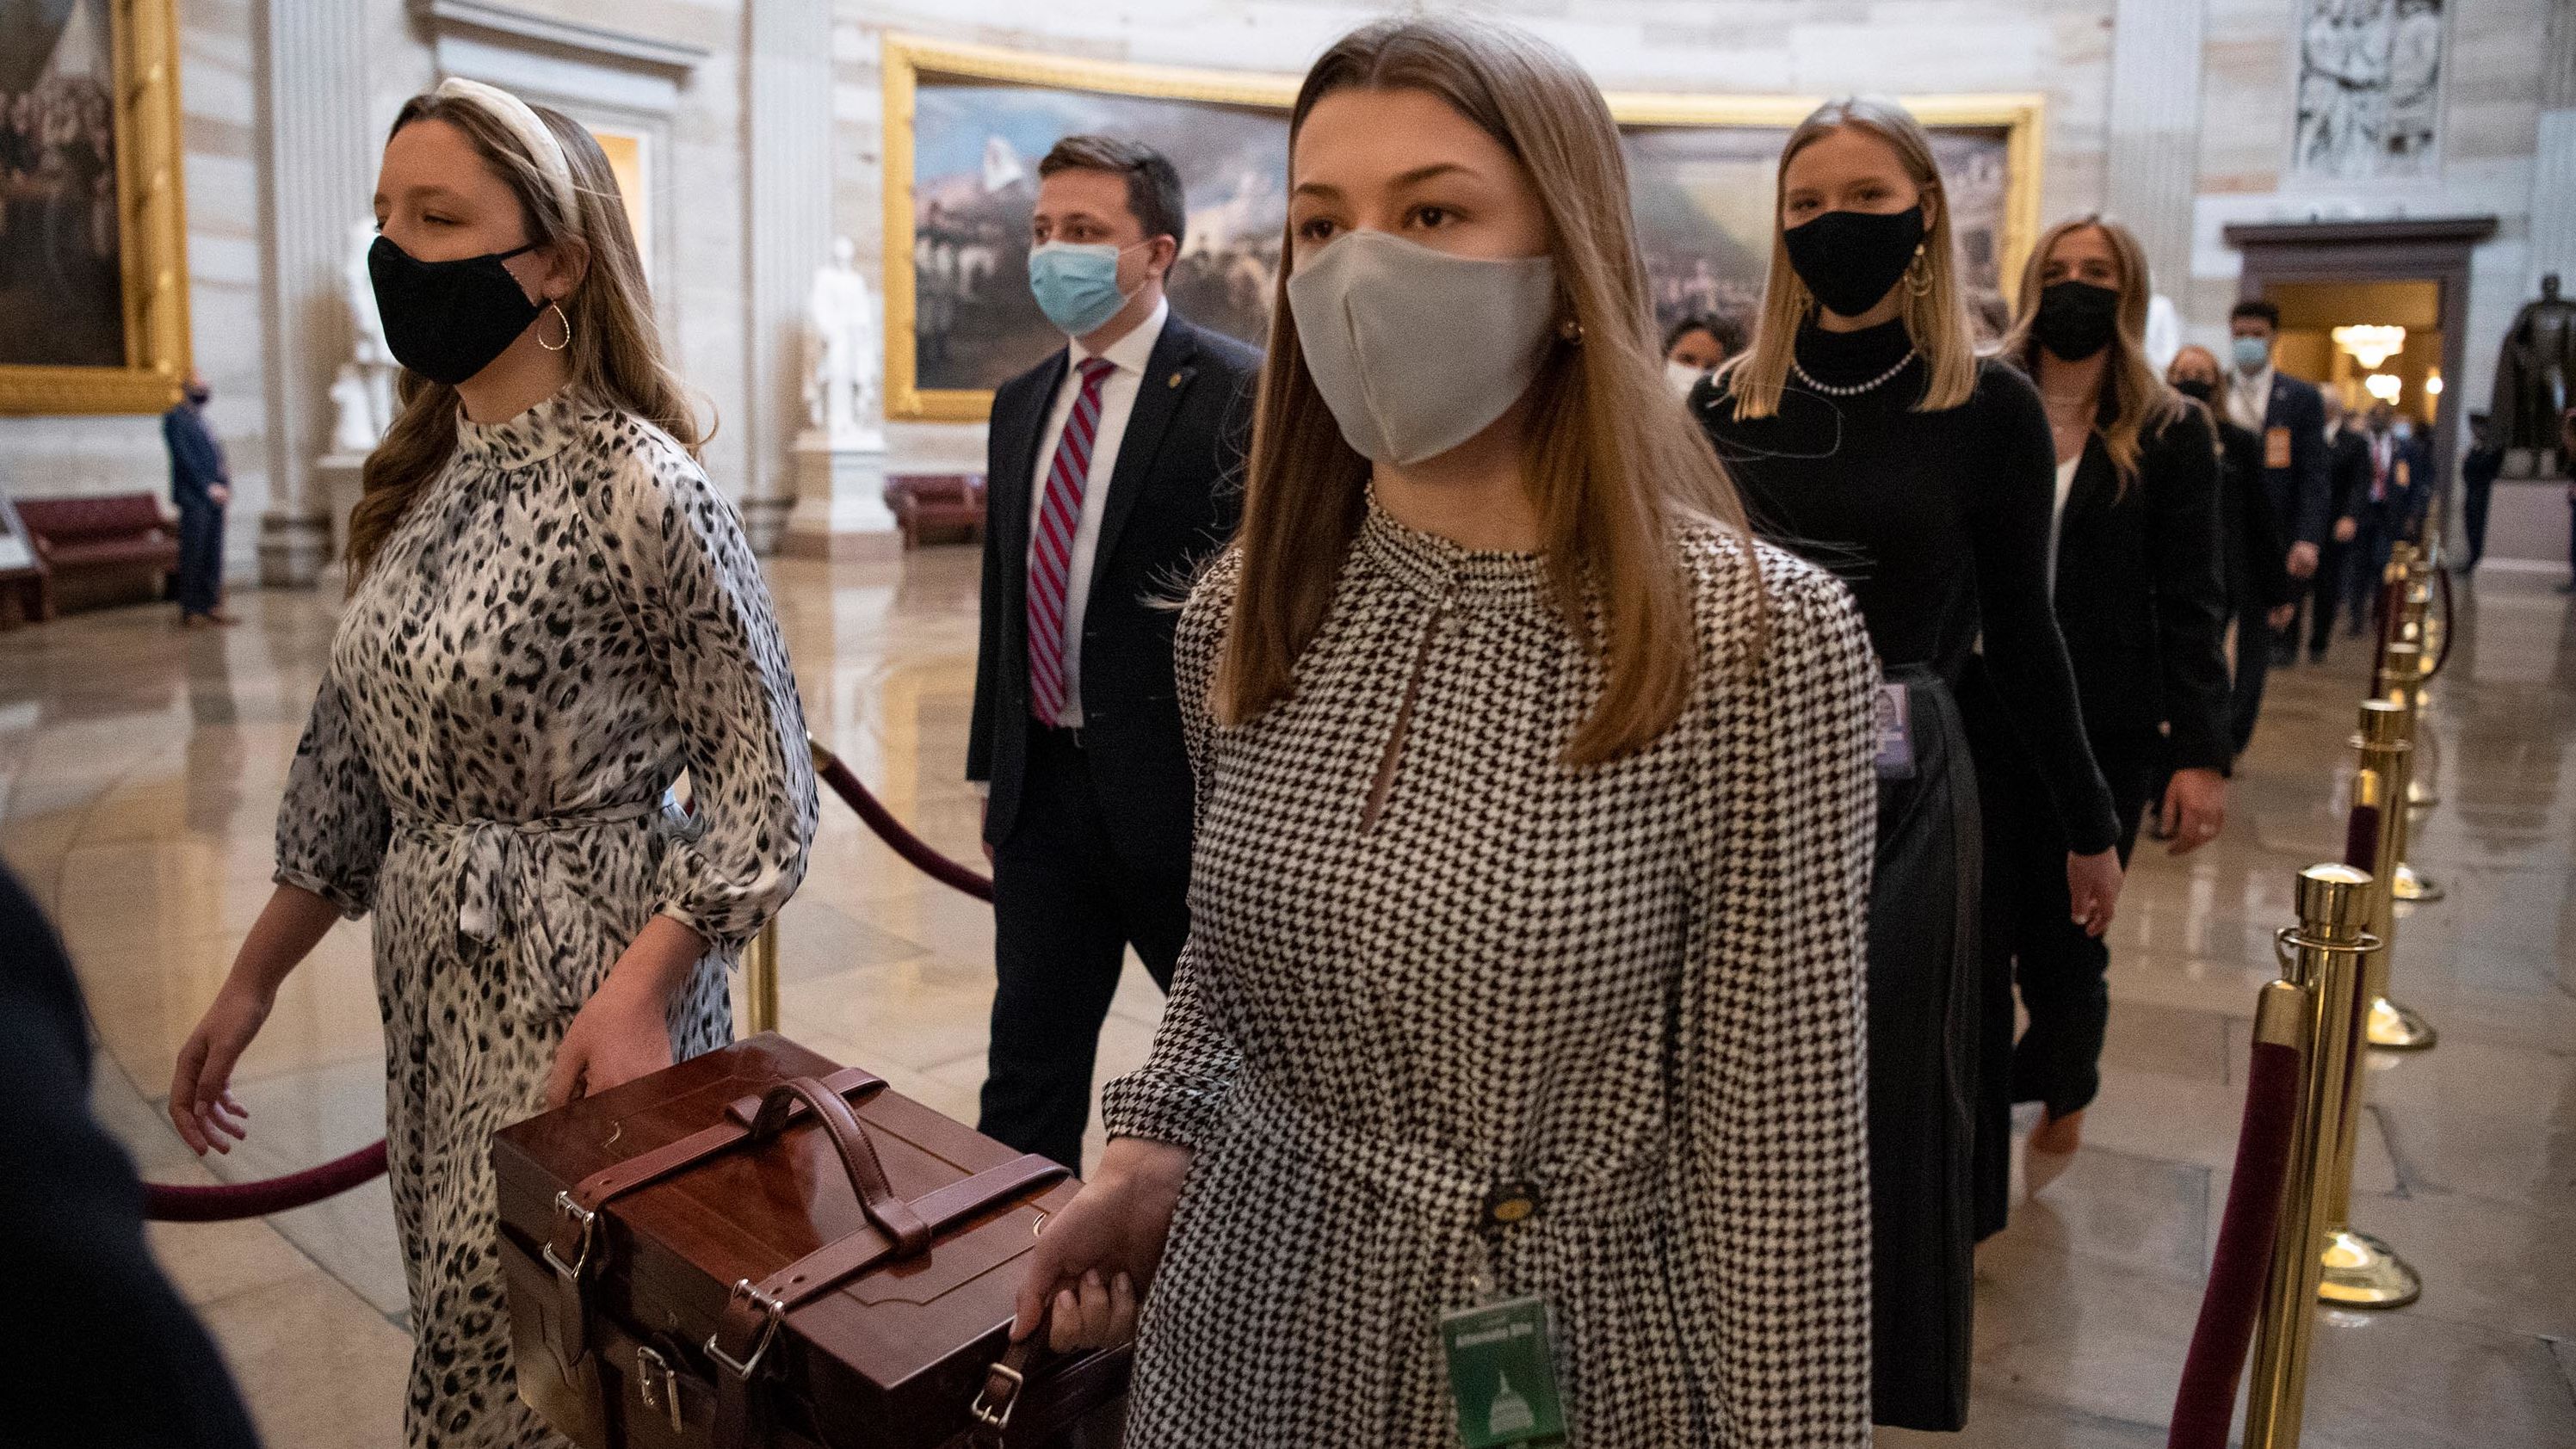 Chamber assistants carry Electoral College ballot boxes at the Capitol. Congress' counting of electoral votes is typically little more than an afterthought. But this joint session was expected to be a contentious affair with some Republicans objecting to the count.